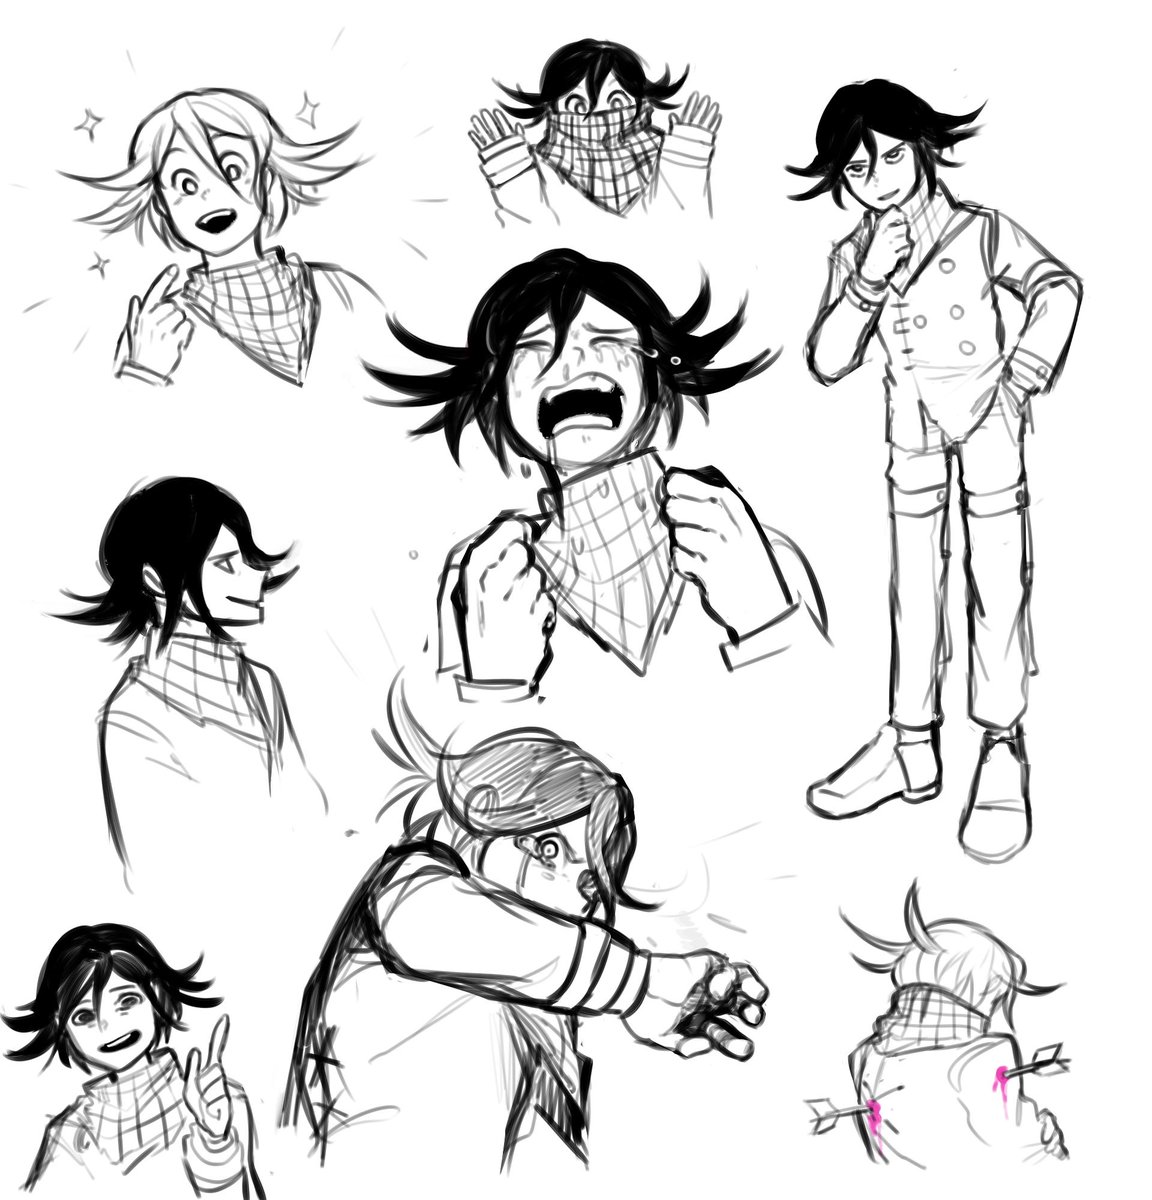 me, arriving several years late to the danganronpa fandom with nothing new to offer for character analysis: "kokichi is my favourite character"

#danganronpa #danganronpav3 